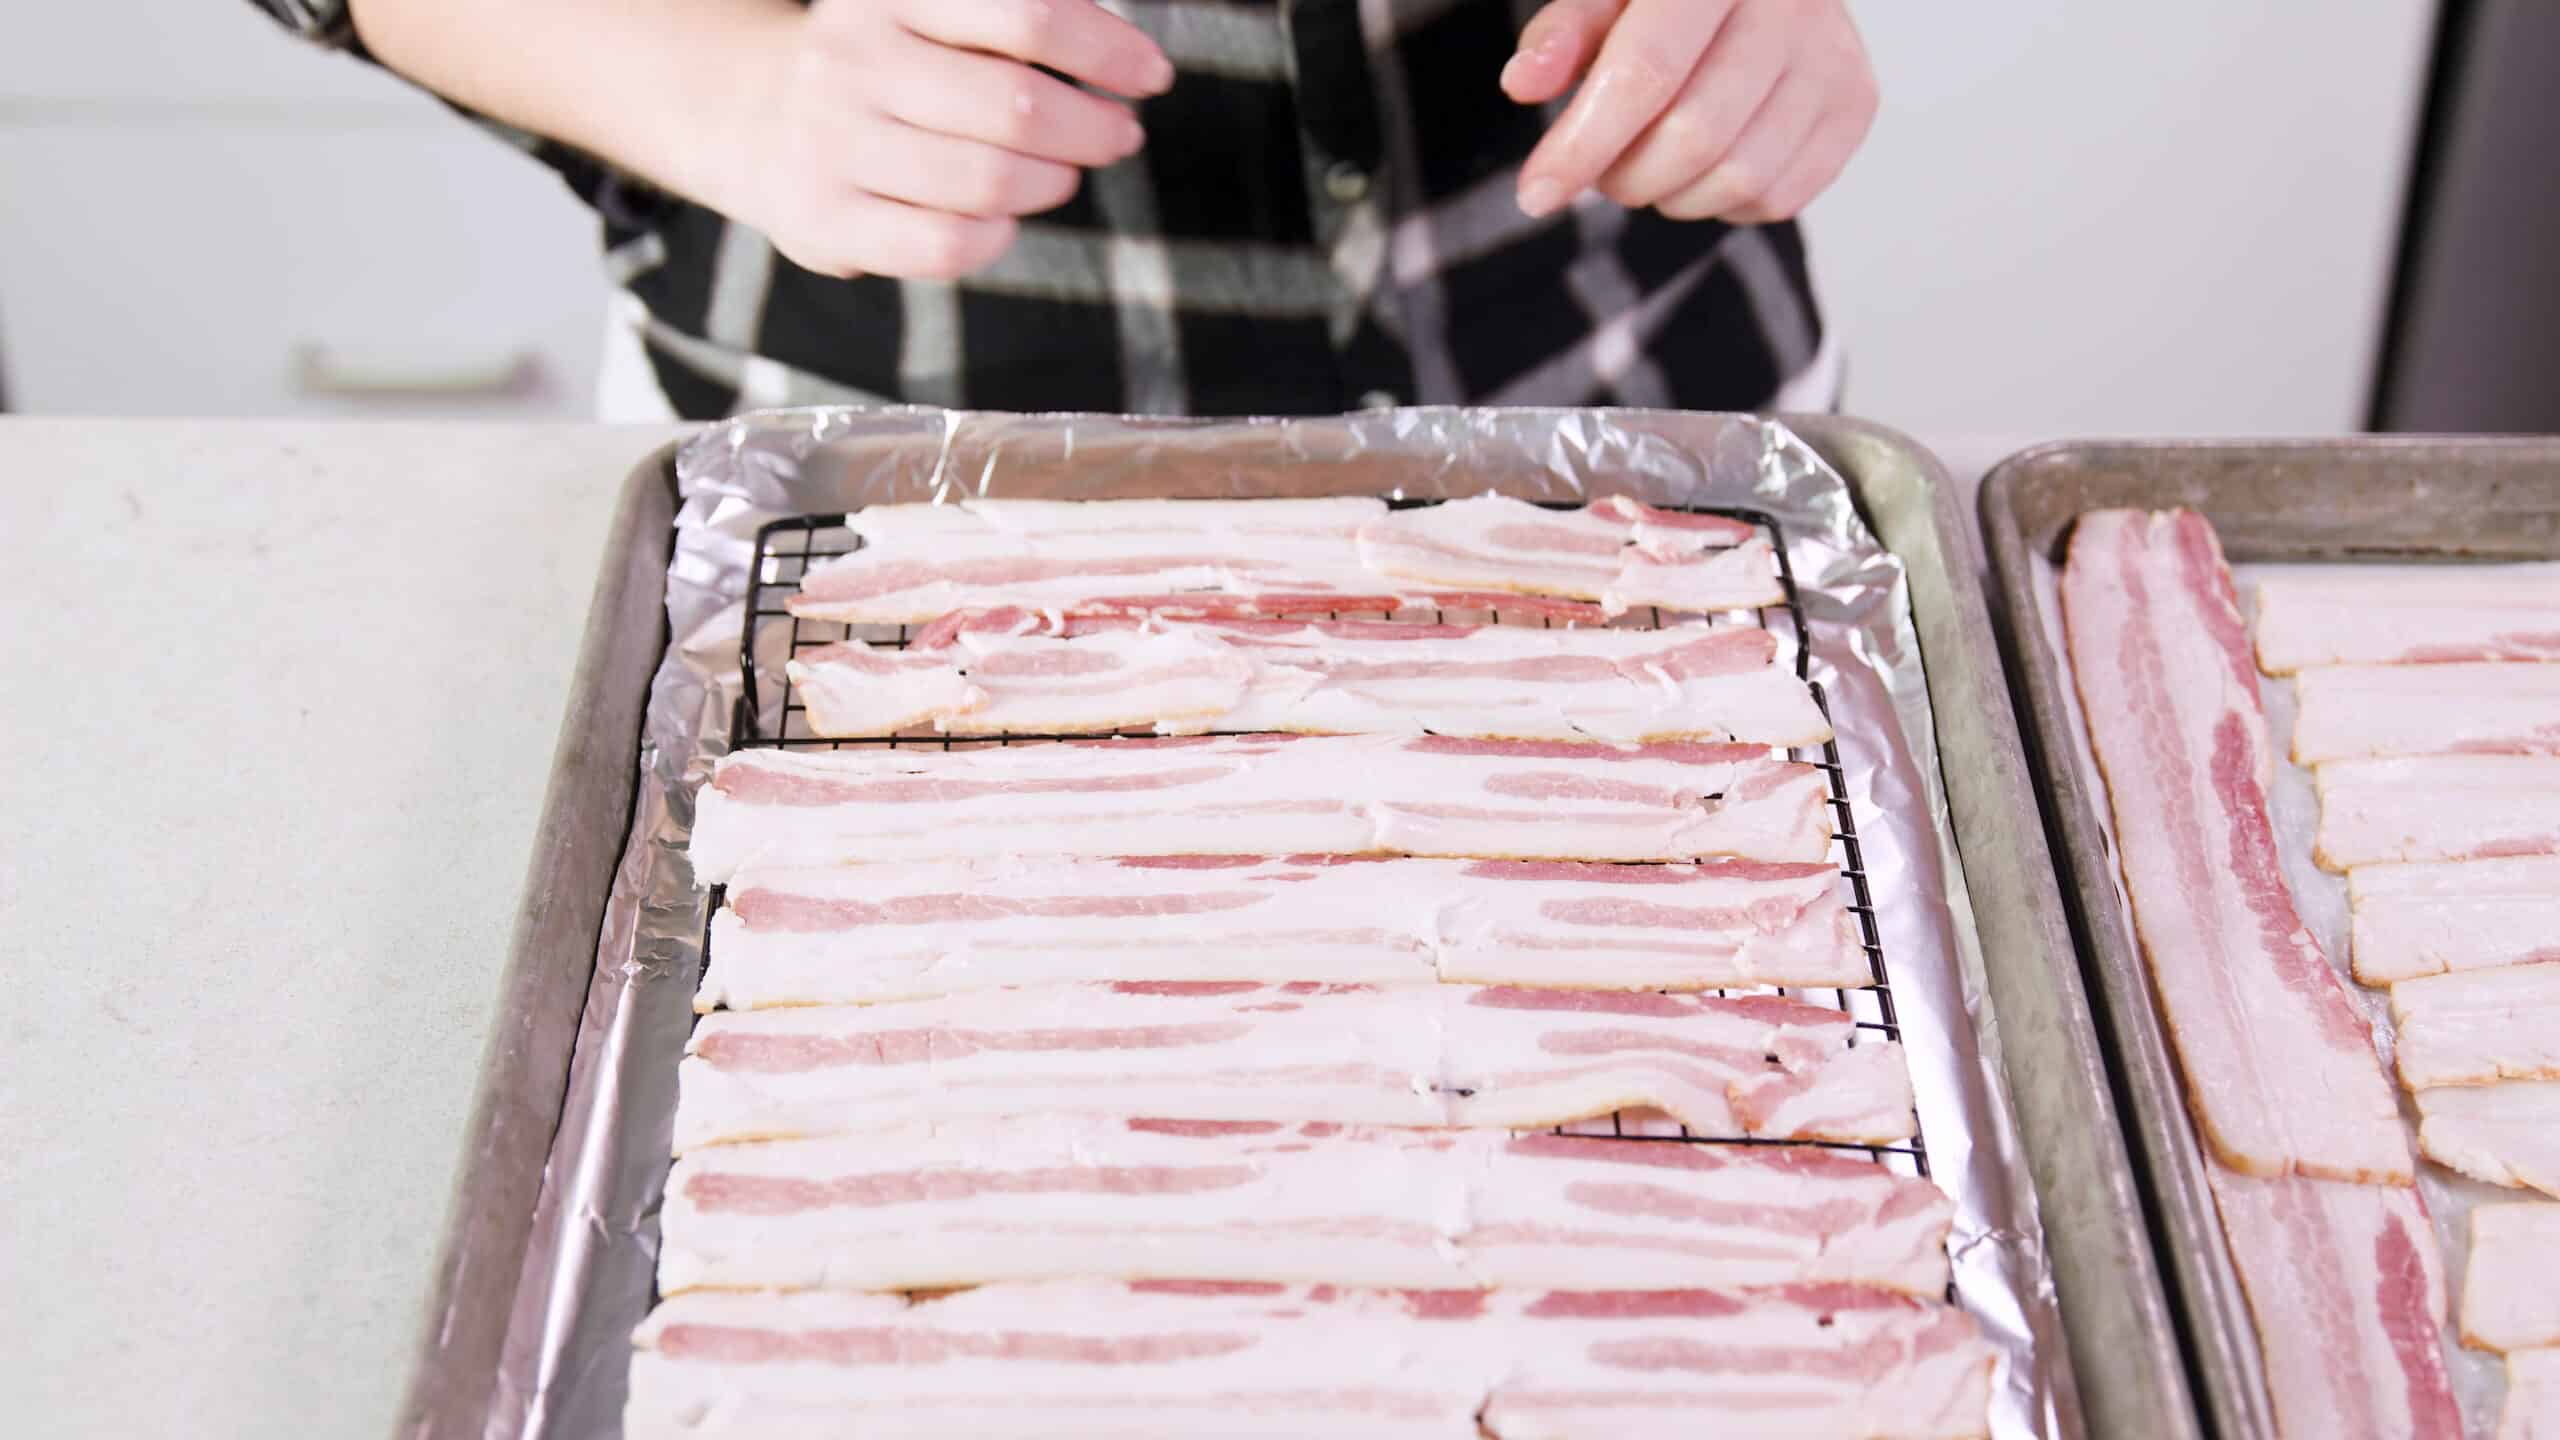 Angled view of metal baking sheet lined with aluminum foil and a cooling rack inside lined with strips of bacon.